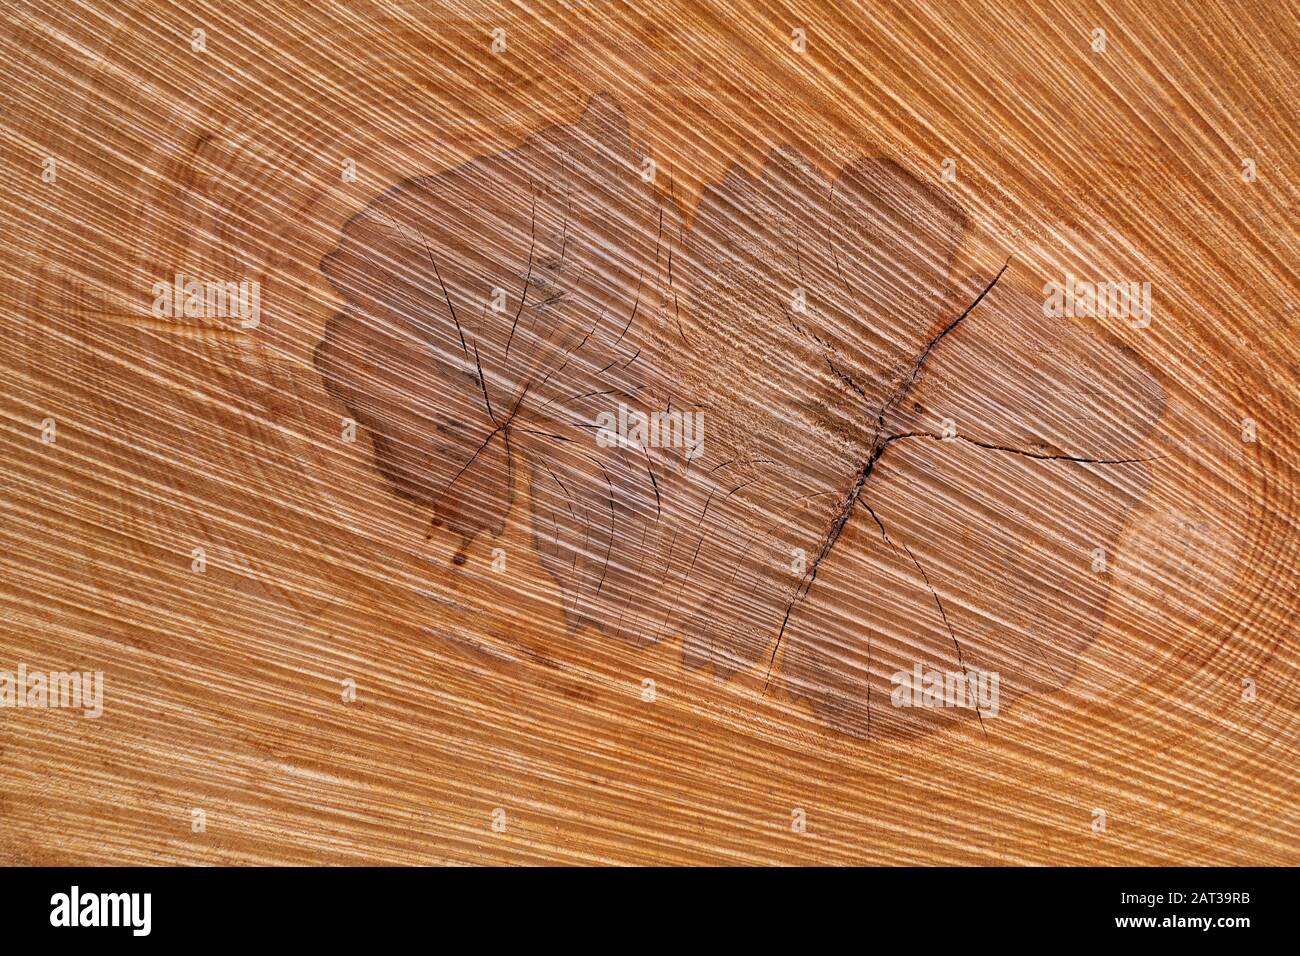 Natural abstract texture in the core of a tree trunk Stock Photo